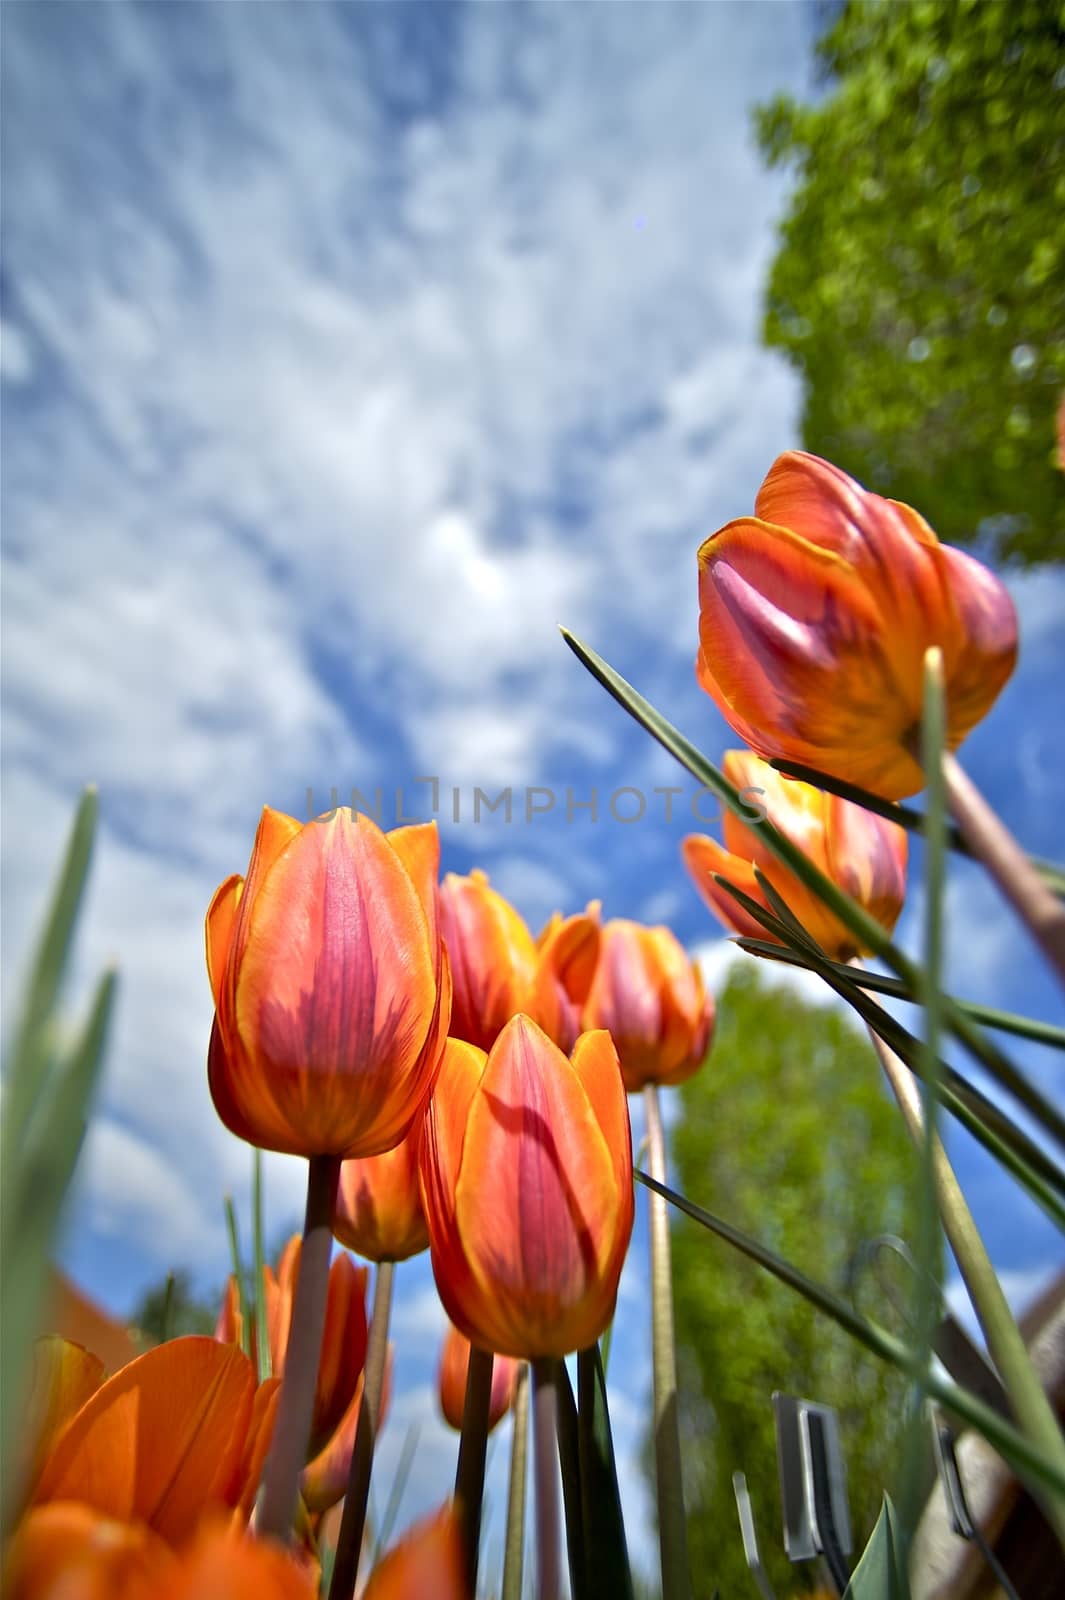 Tulips Blossom. Red Spring Tulips in the Garden. Wide Angle Creative Shot from the Bottom. Cloudy Blue Sky. One Sunny Day. 